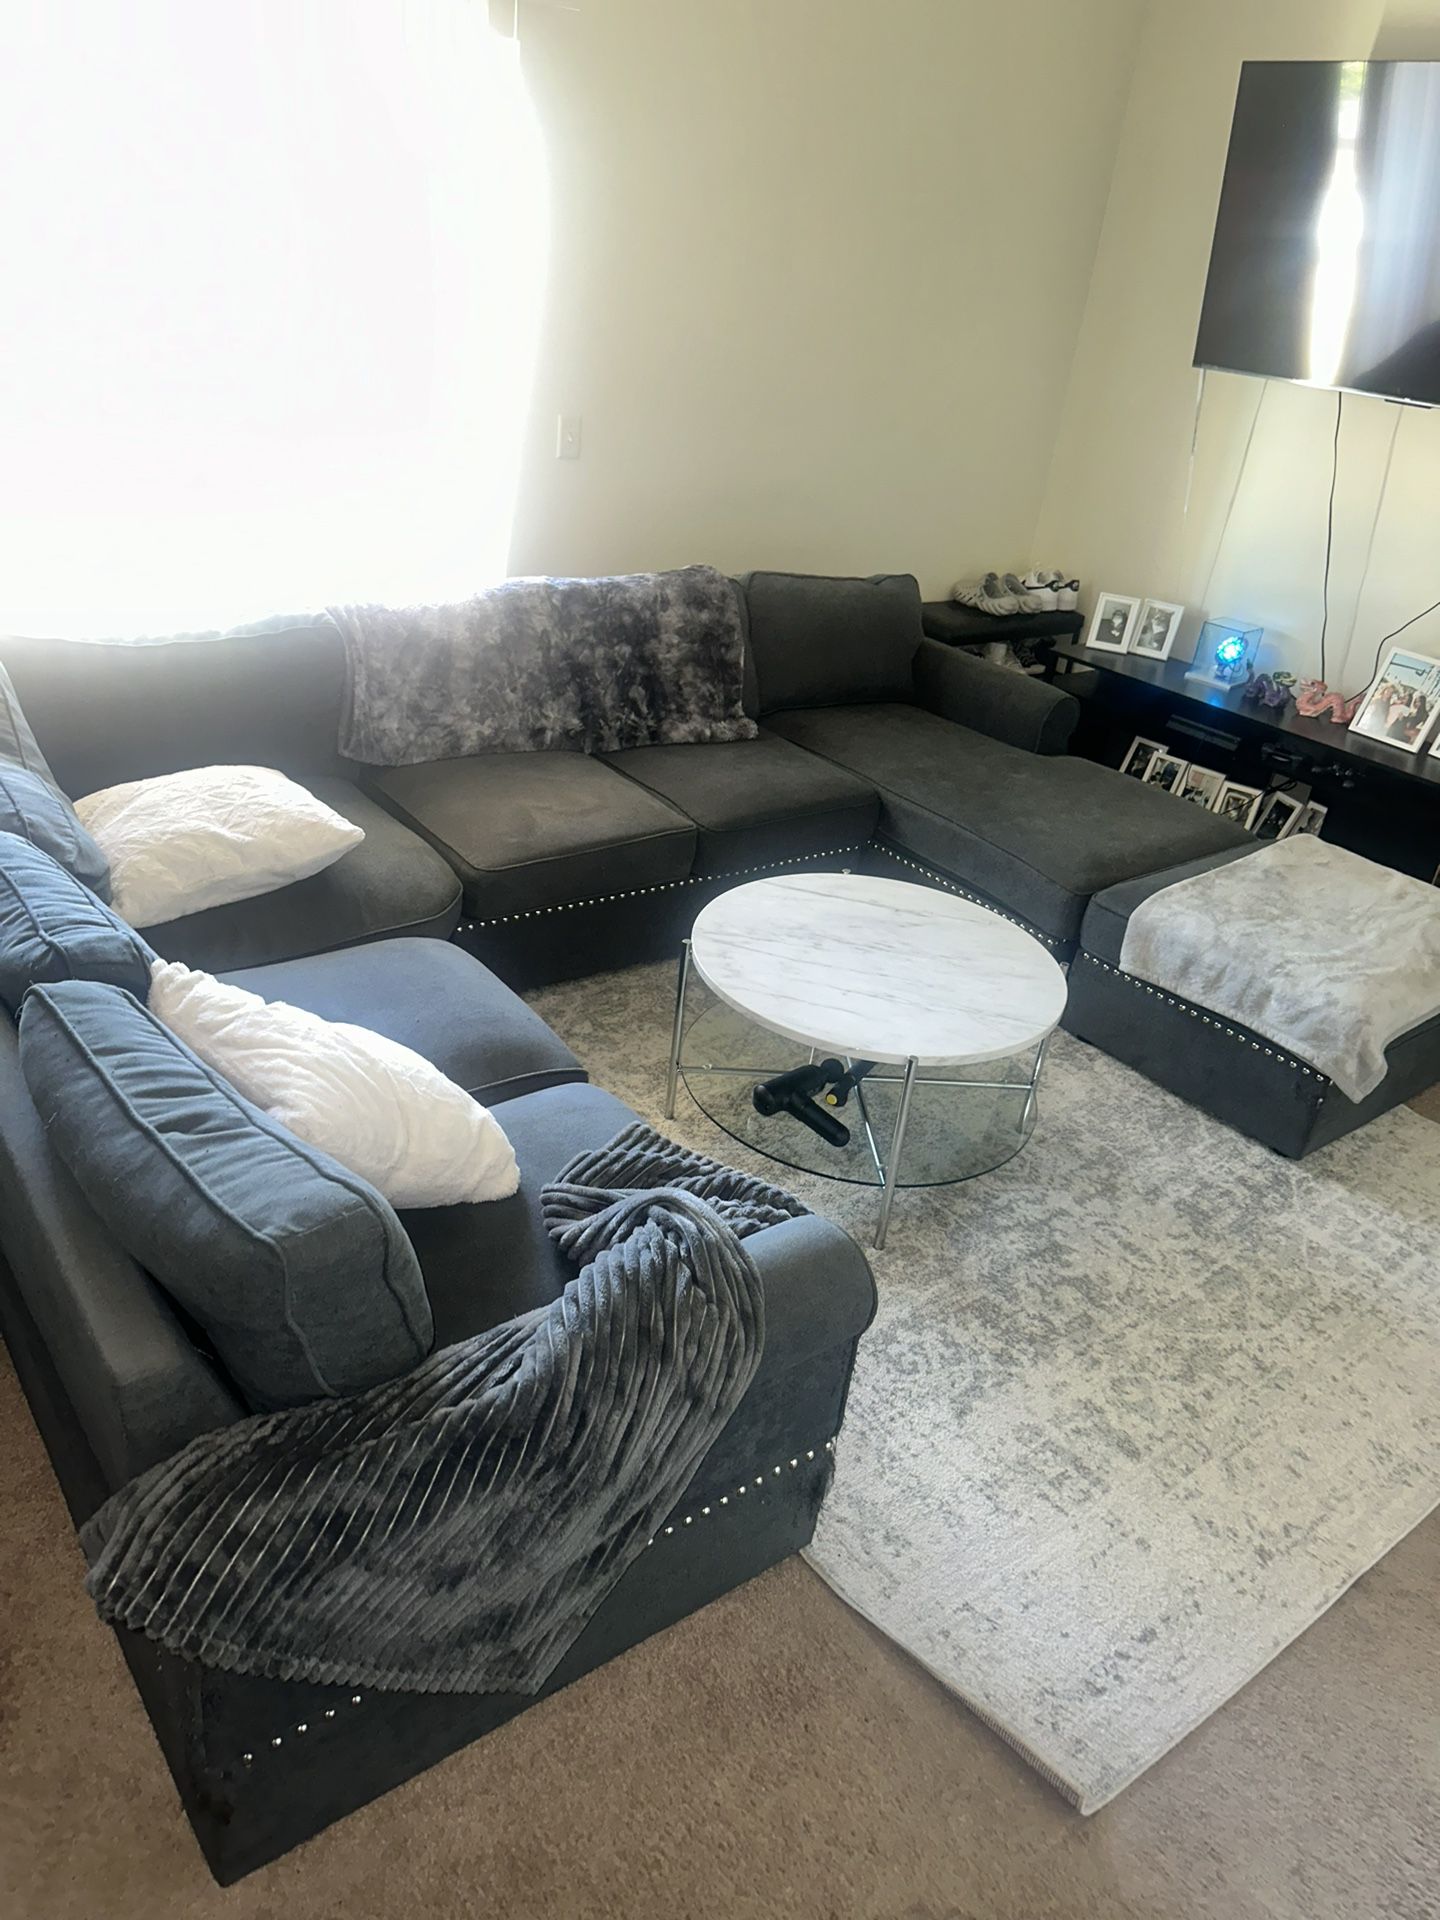 Gray Sectional Couch For Sale OBO